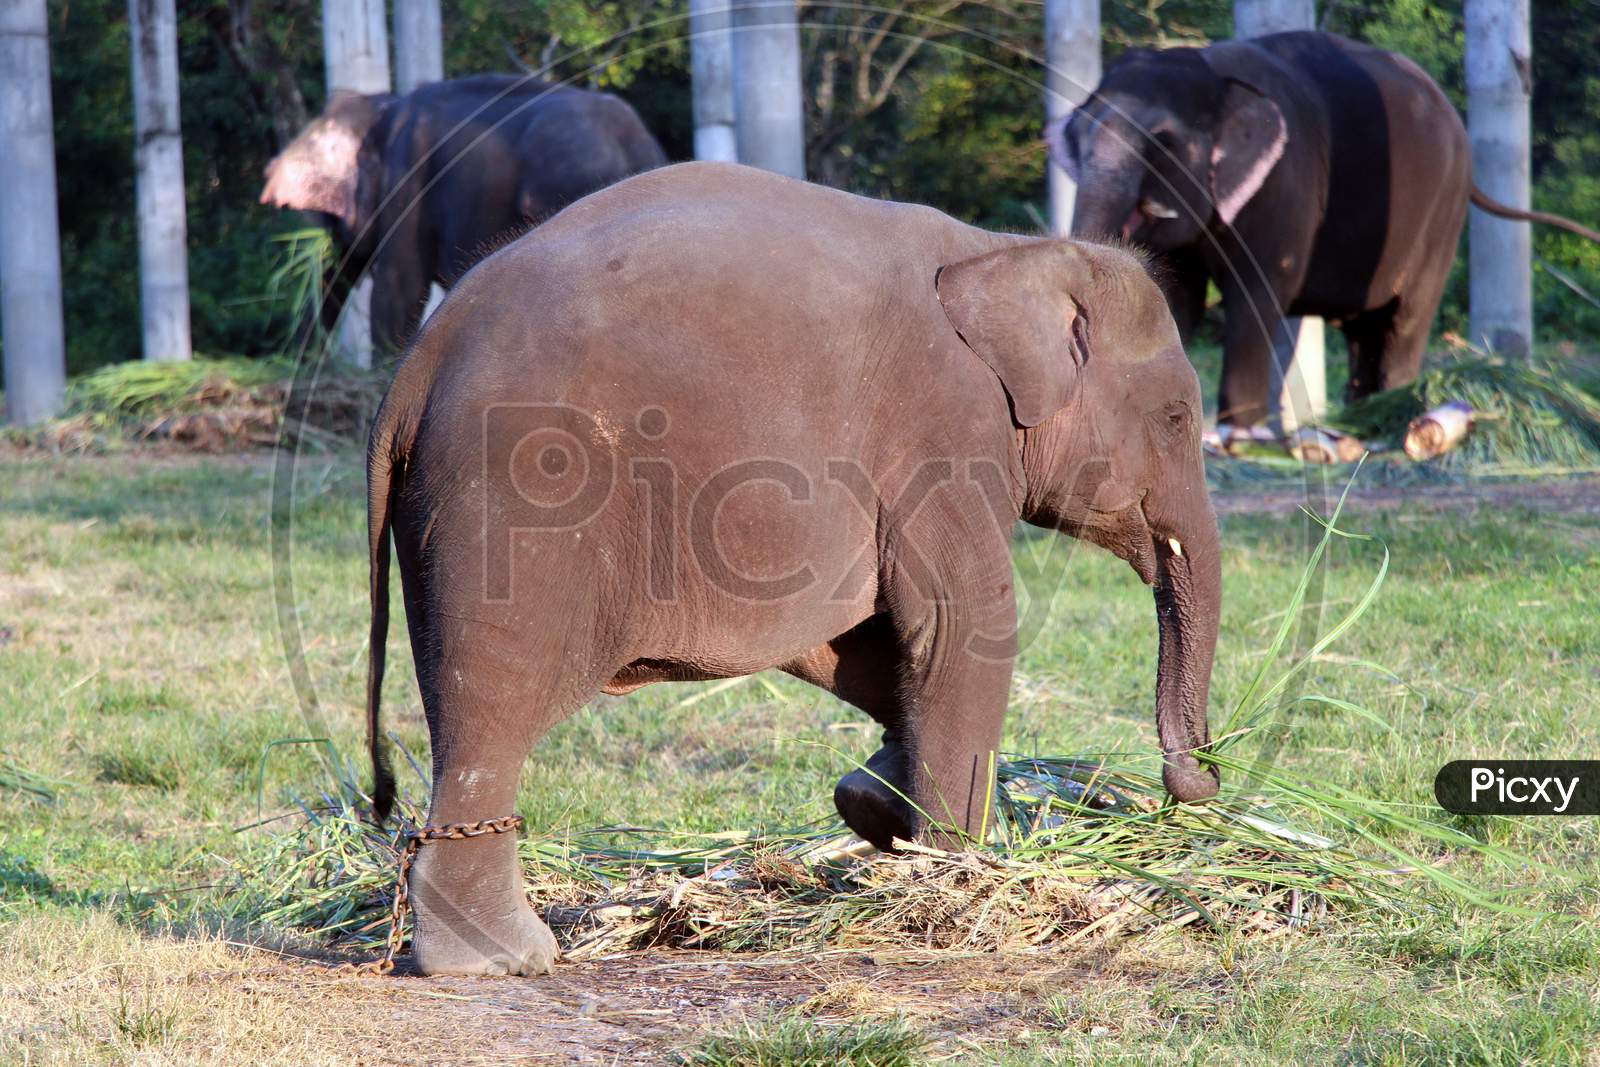 Elephants eating grass in a Zoo